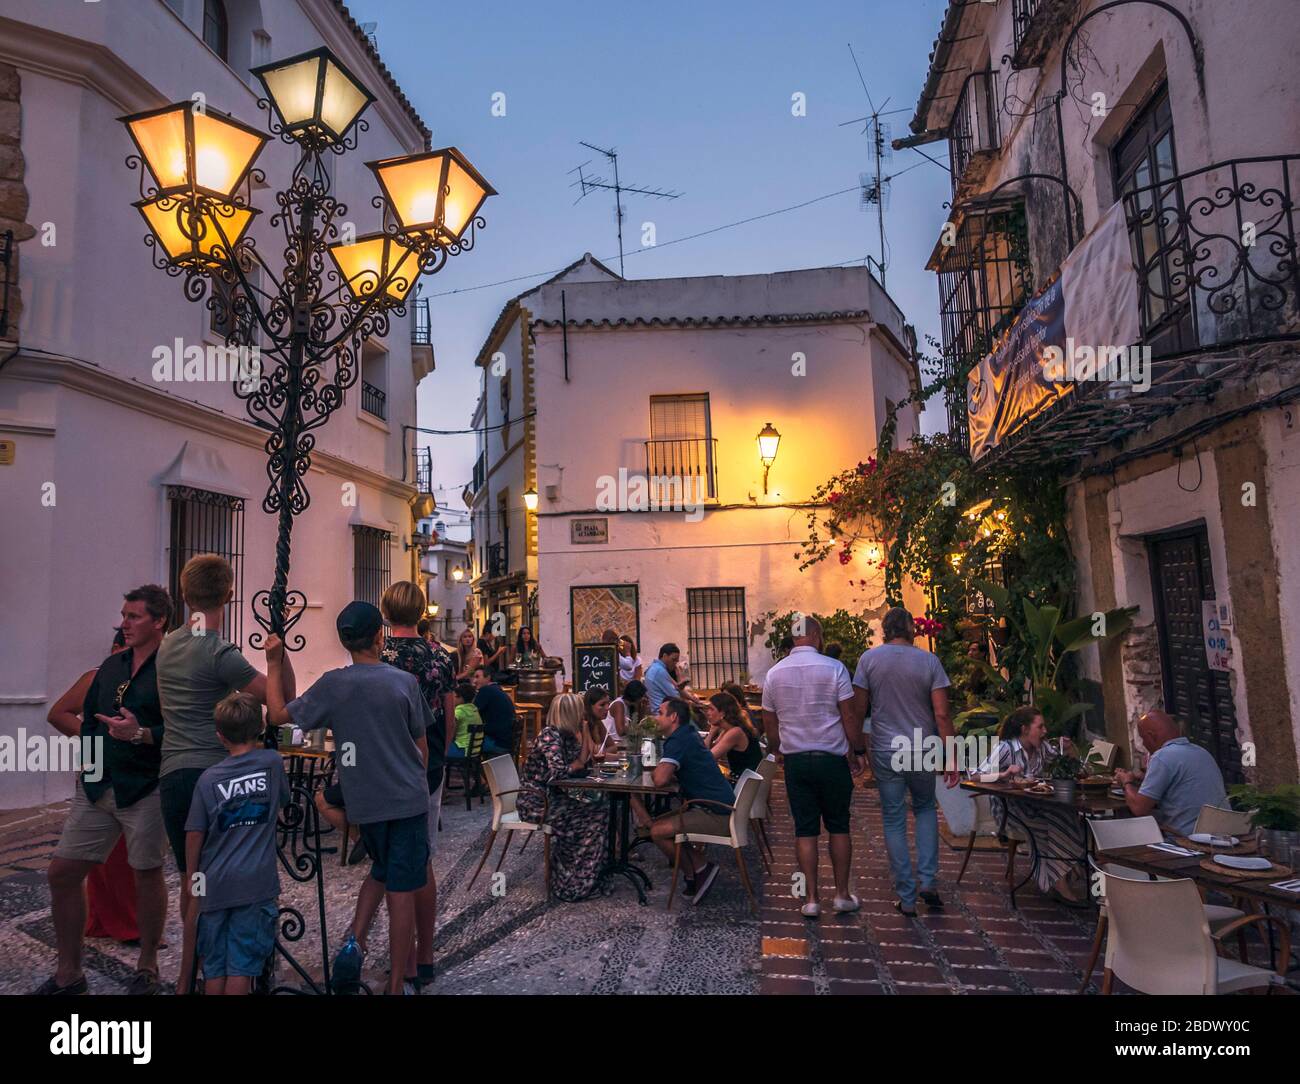 A busy narrow street in Marbella old town, Marbella, Spain. Stock Photo